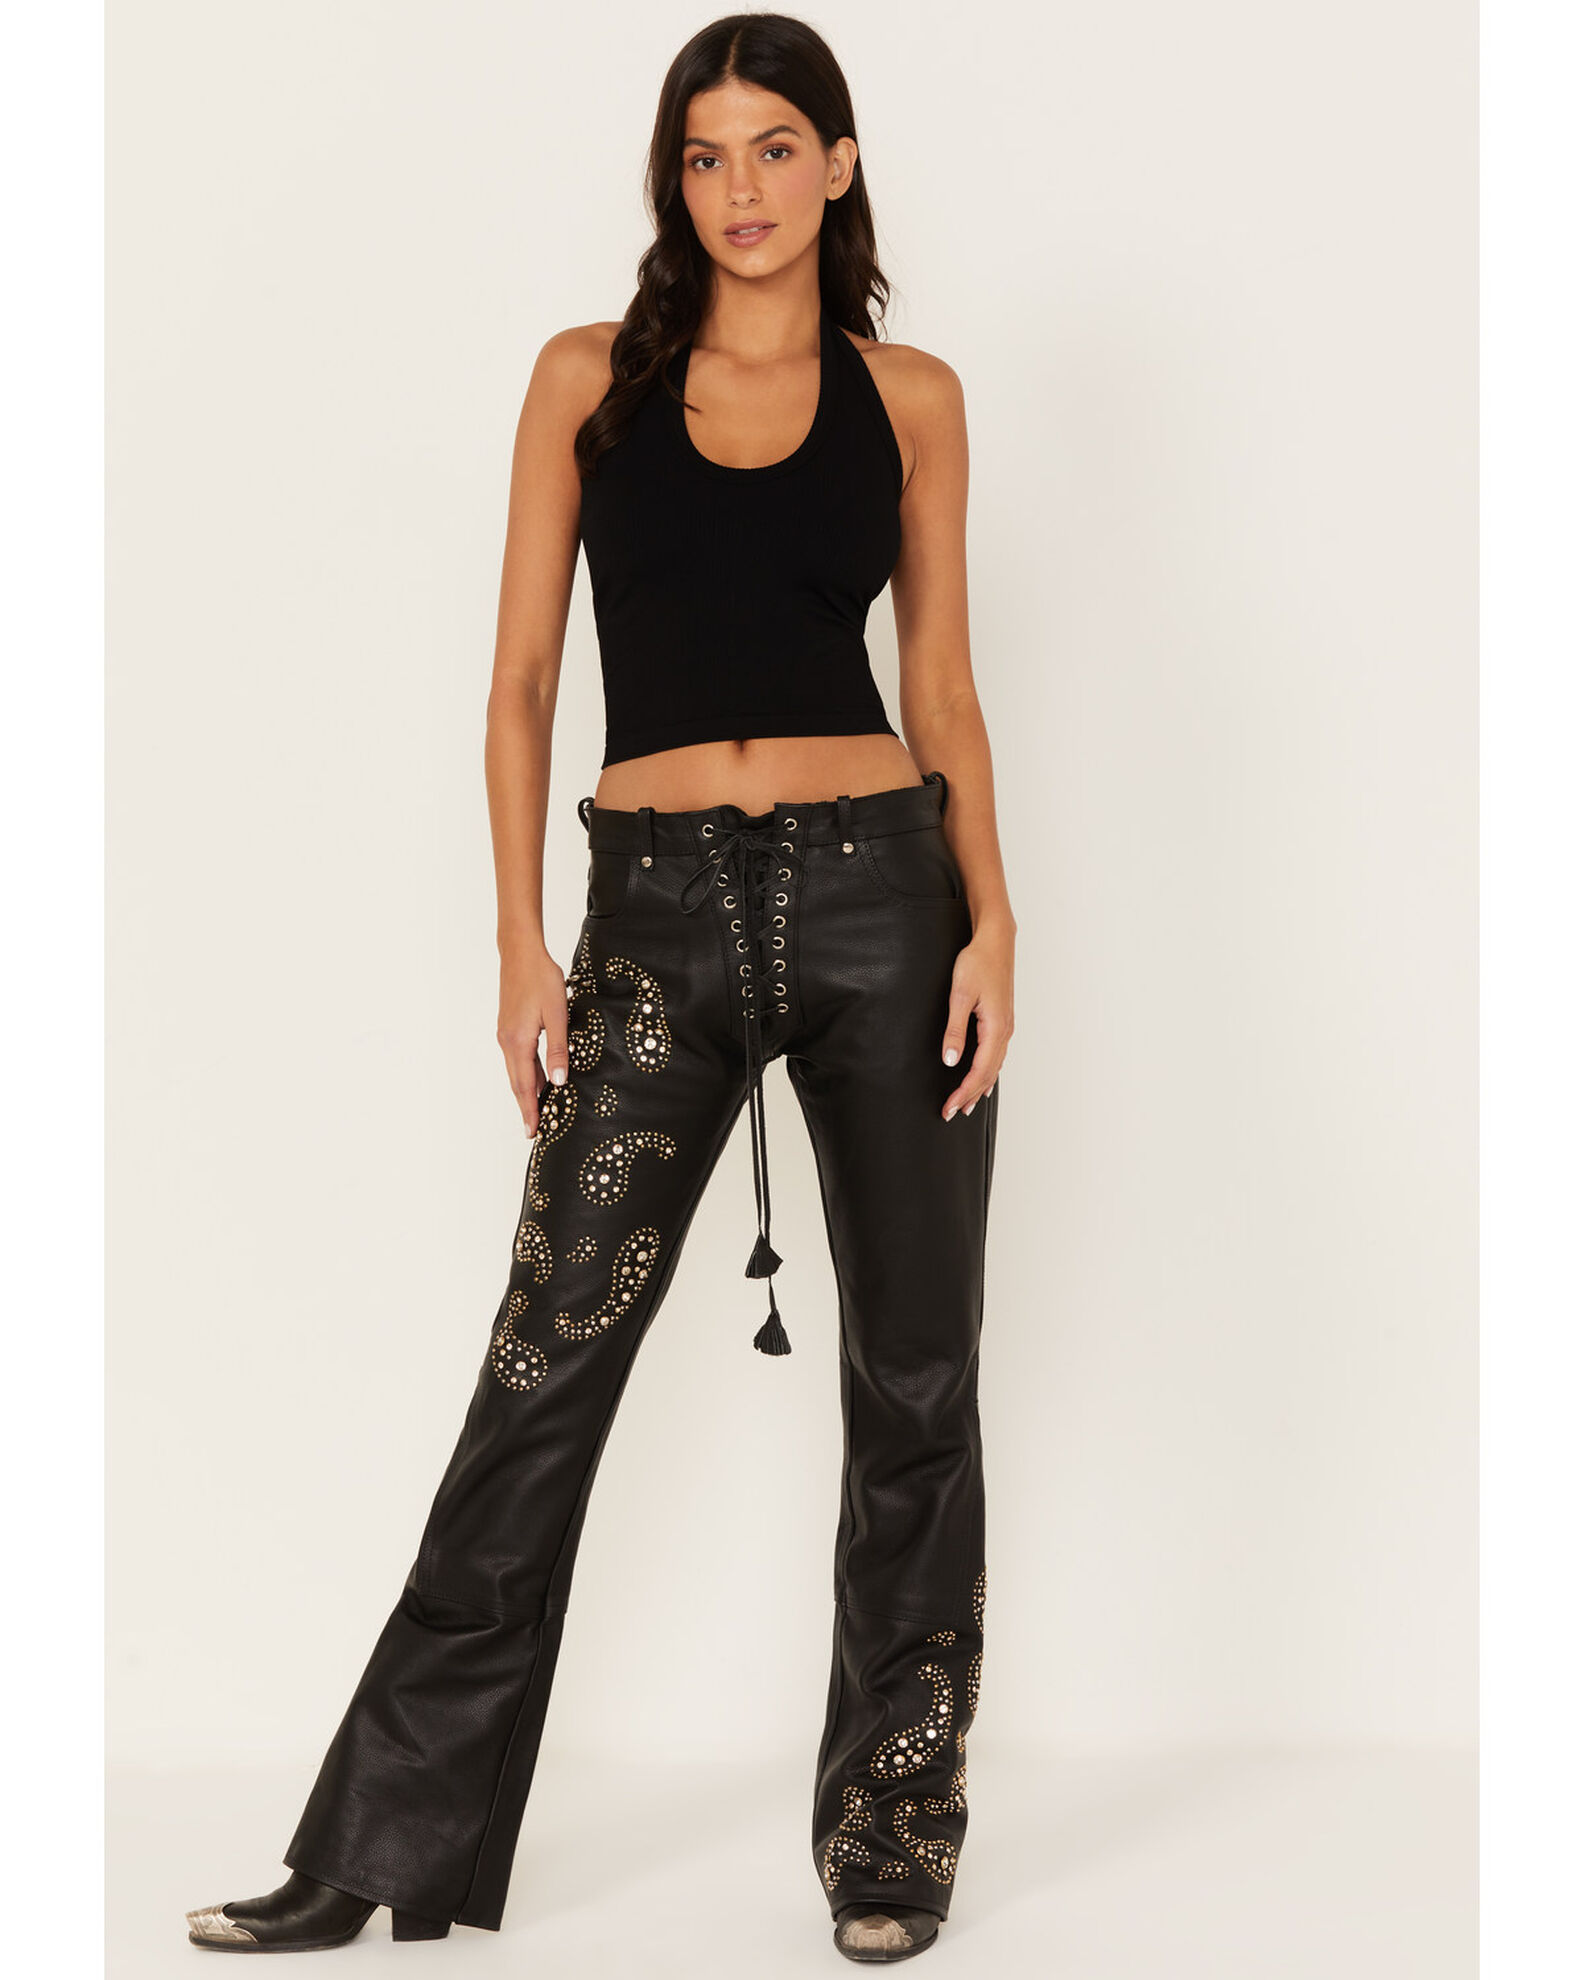 Boot Barn X Understated Leather Women's Rhinestone Studded Lace-Up Flare  Leather Pants